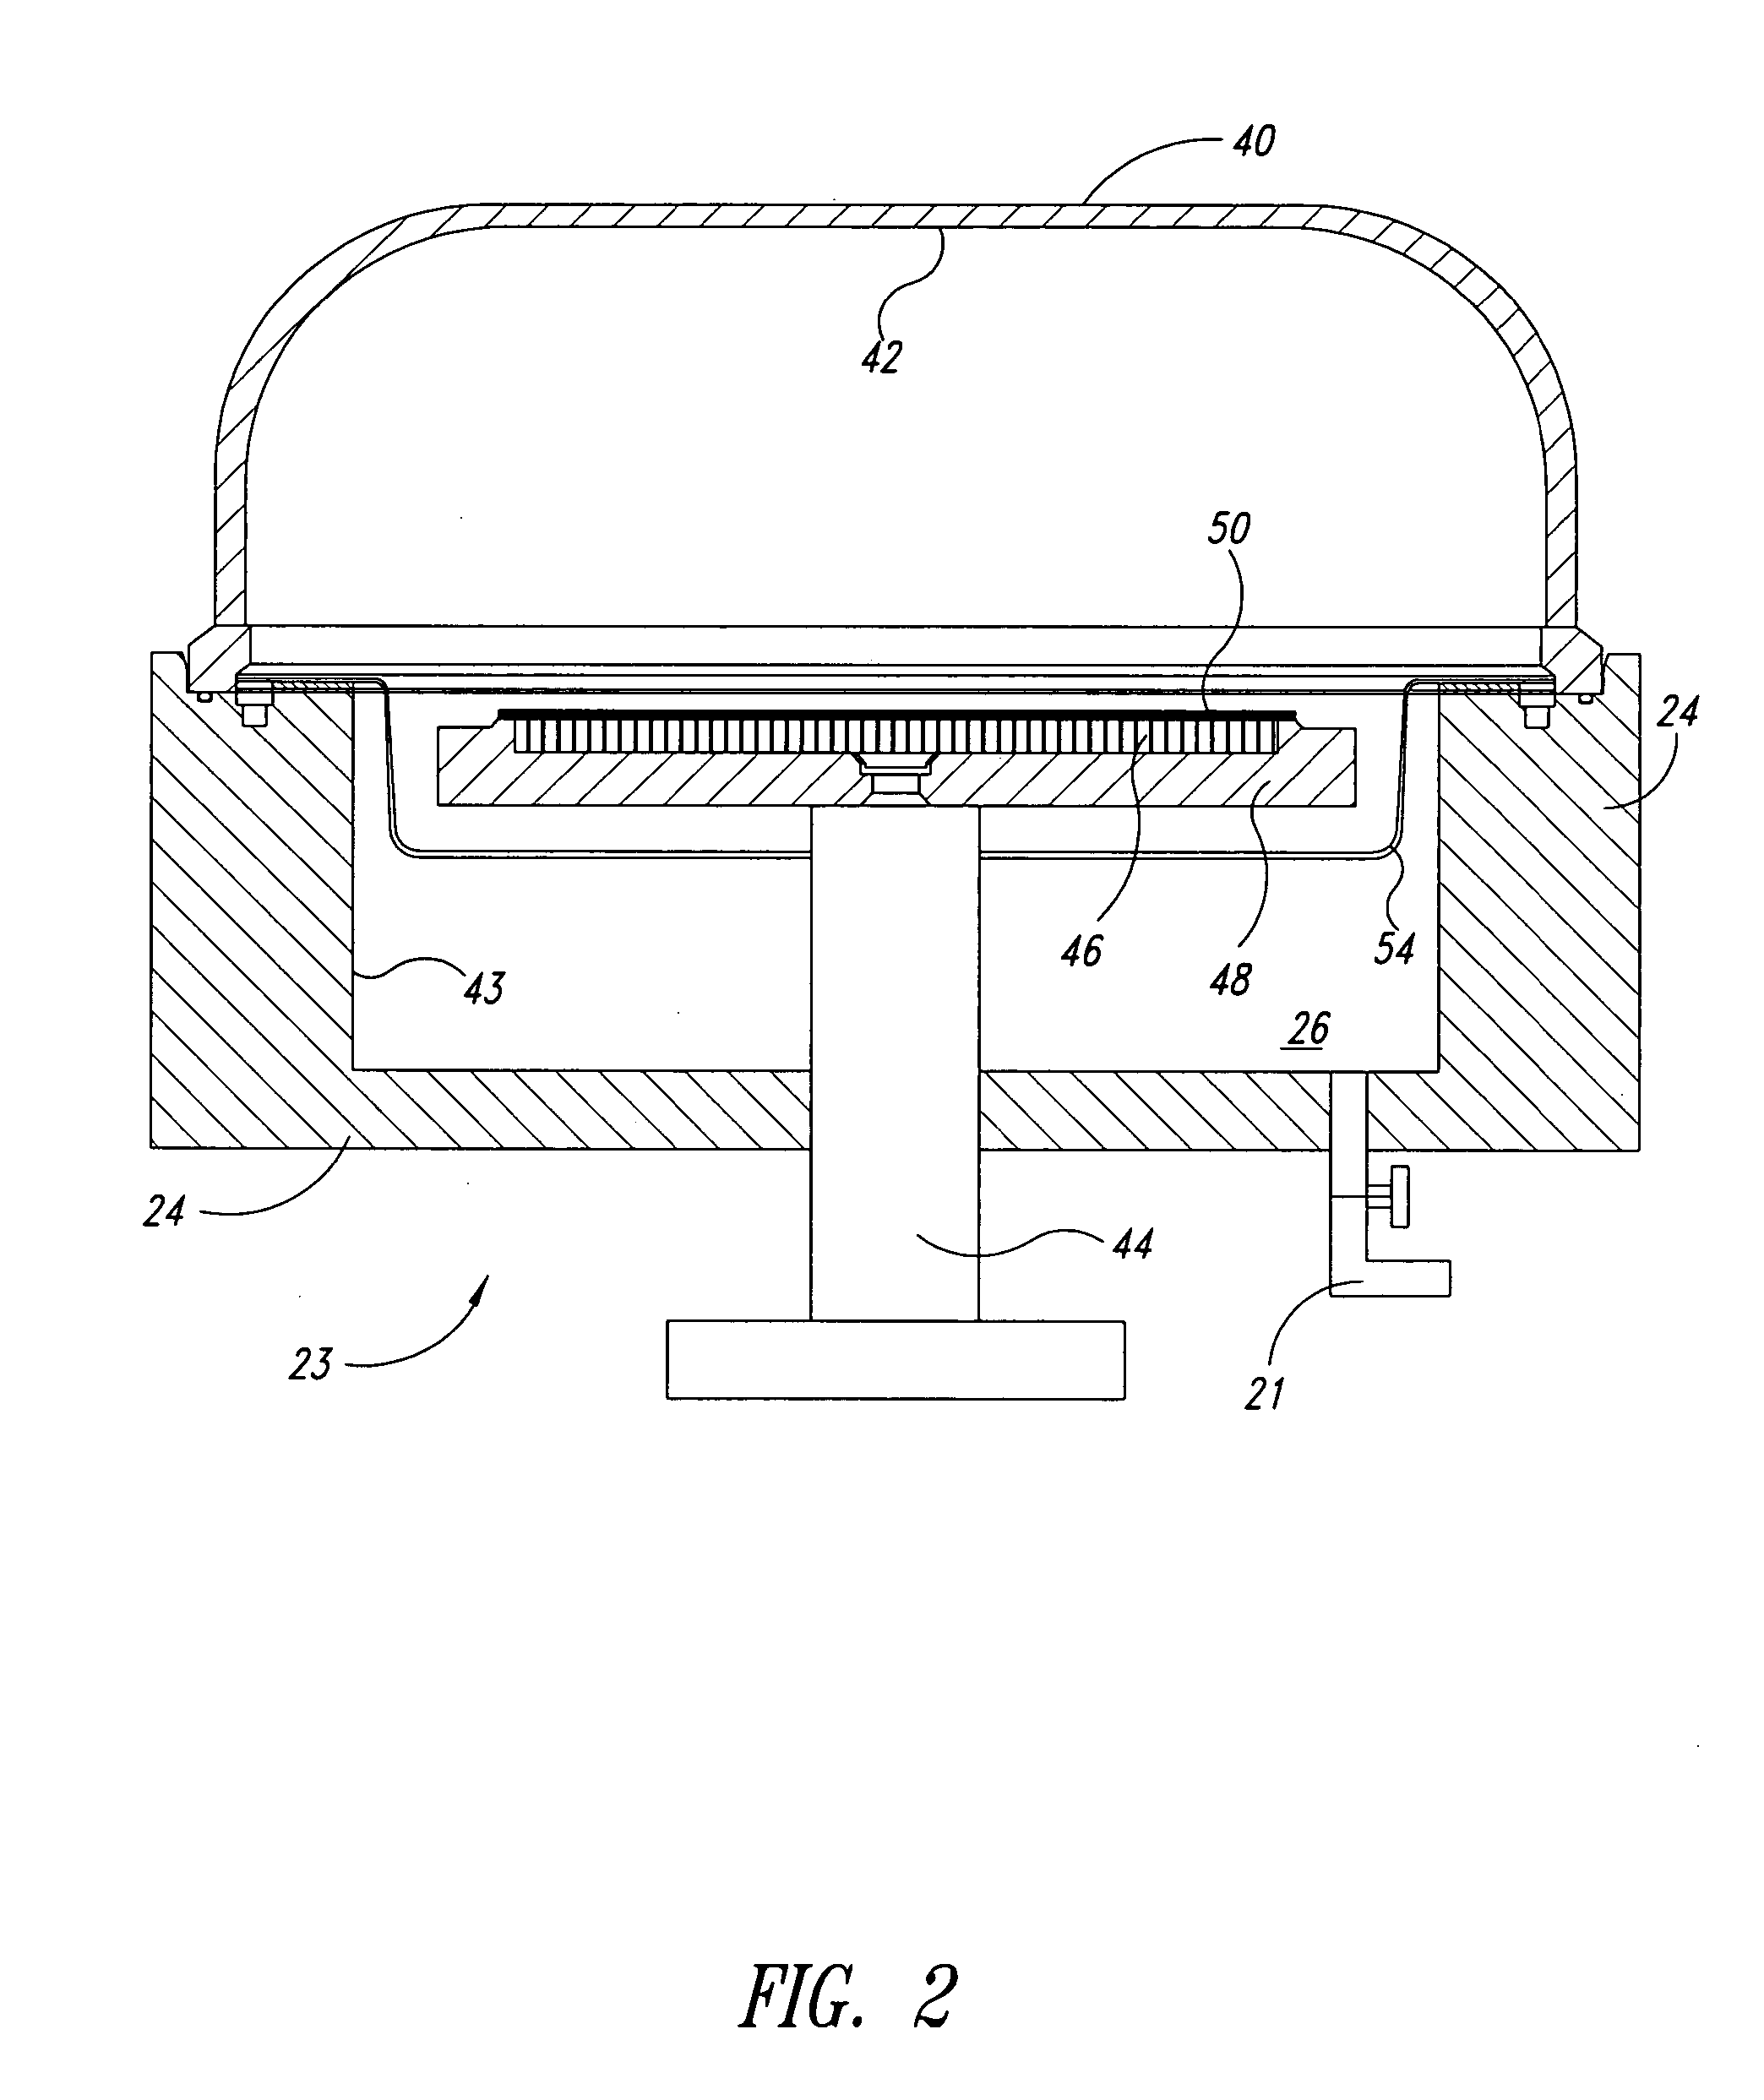 Nucleation layer deposition on semiconductor process equipment parts